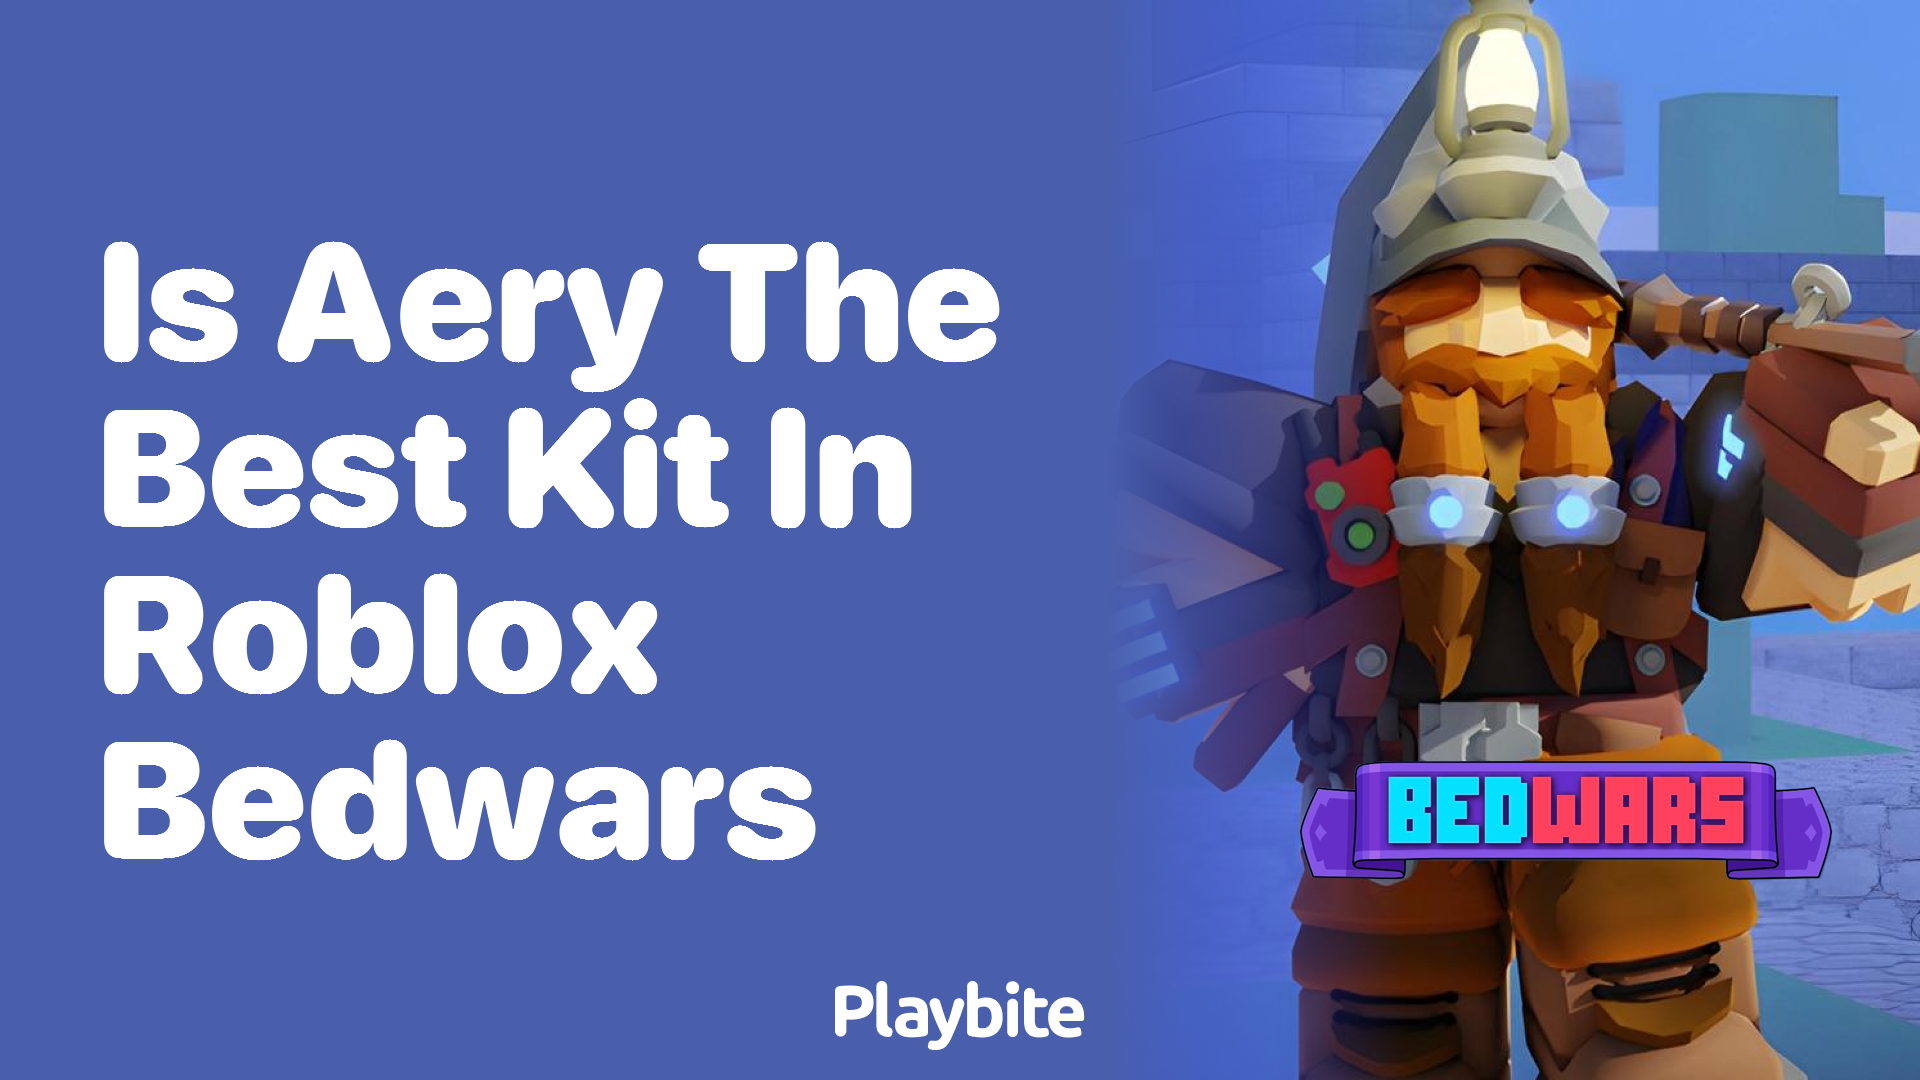 Is Aery the Best Kit in Roblox Bedwars?